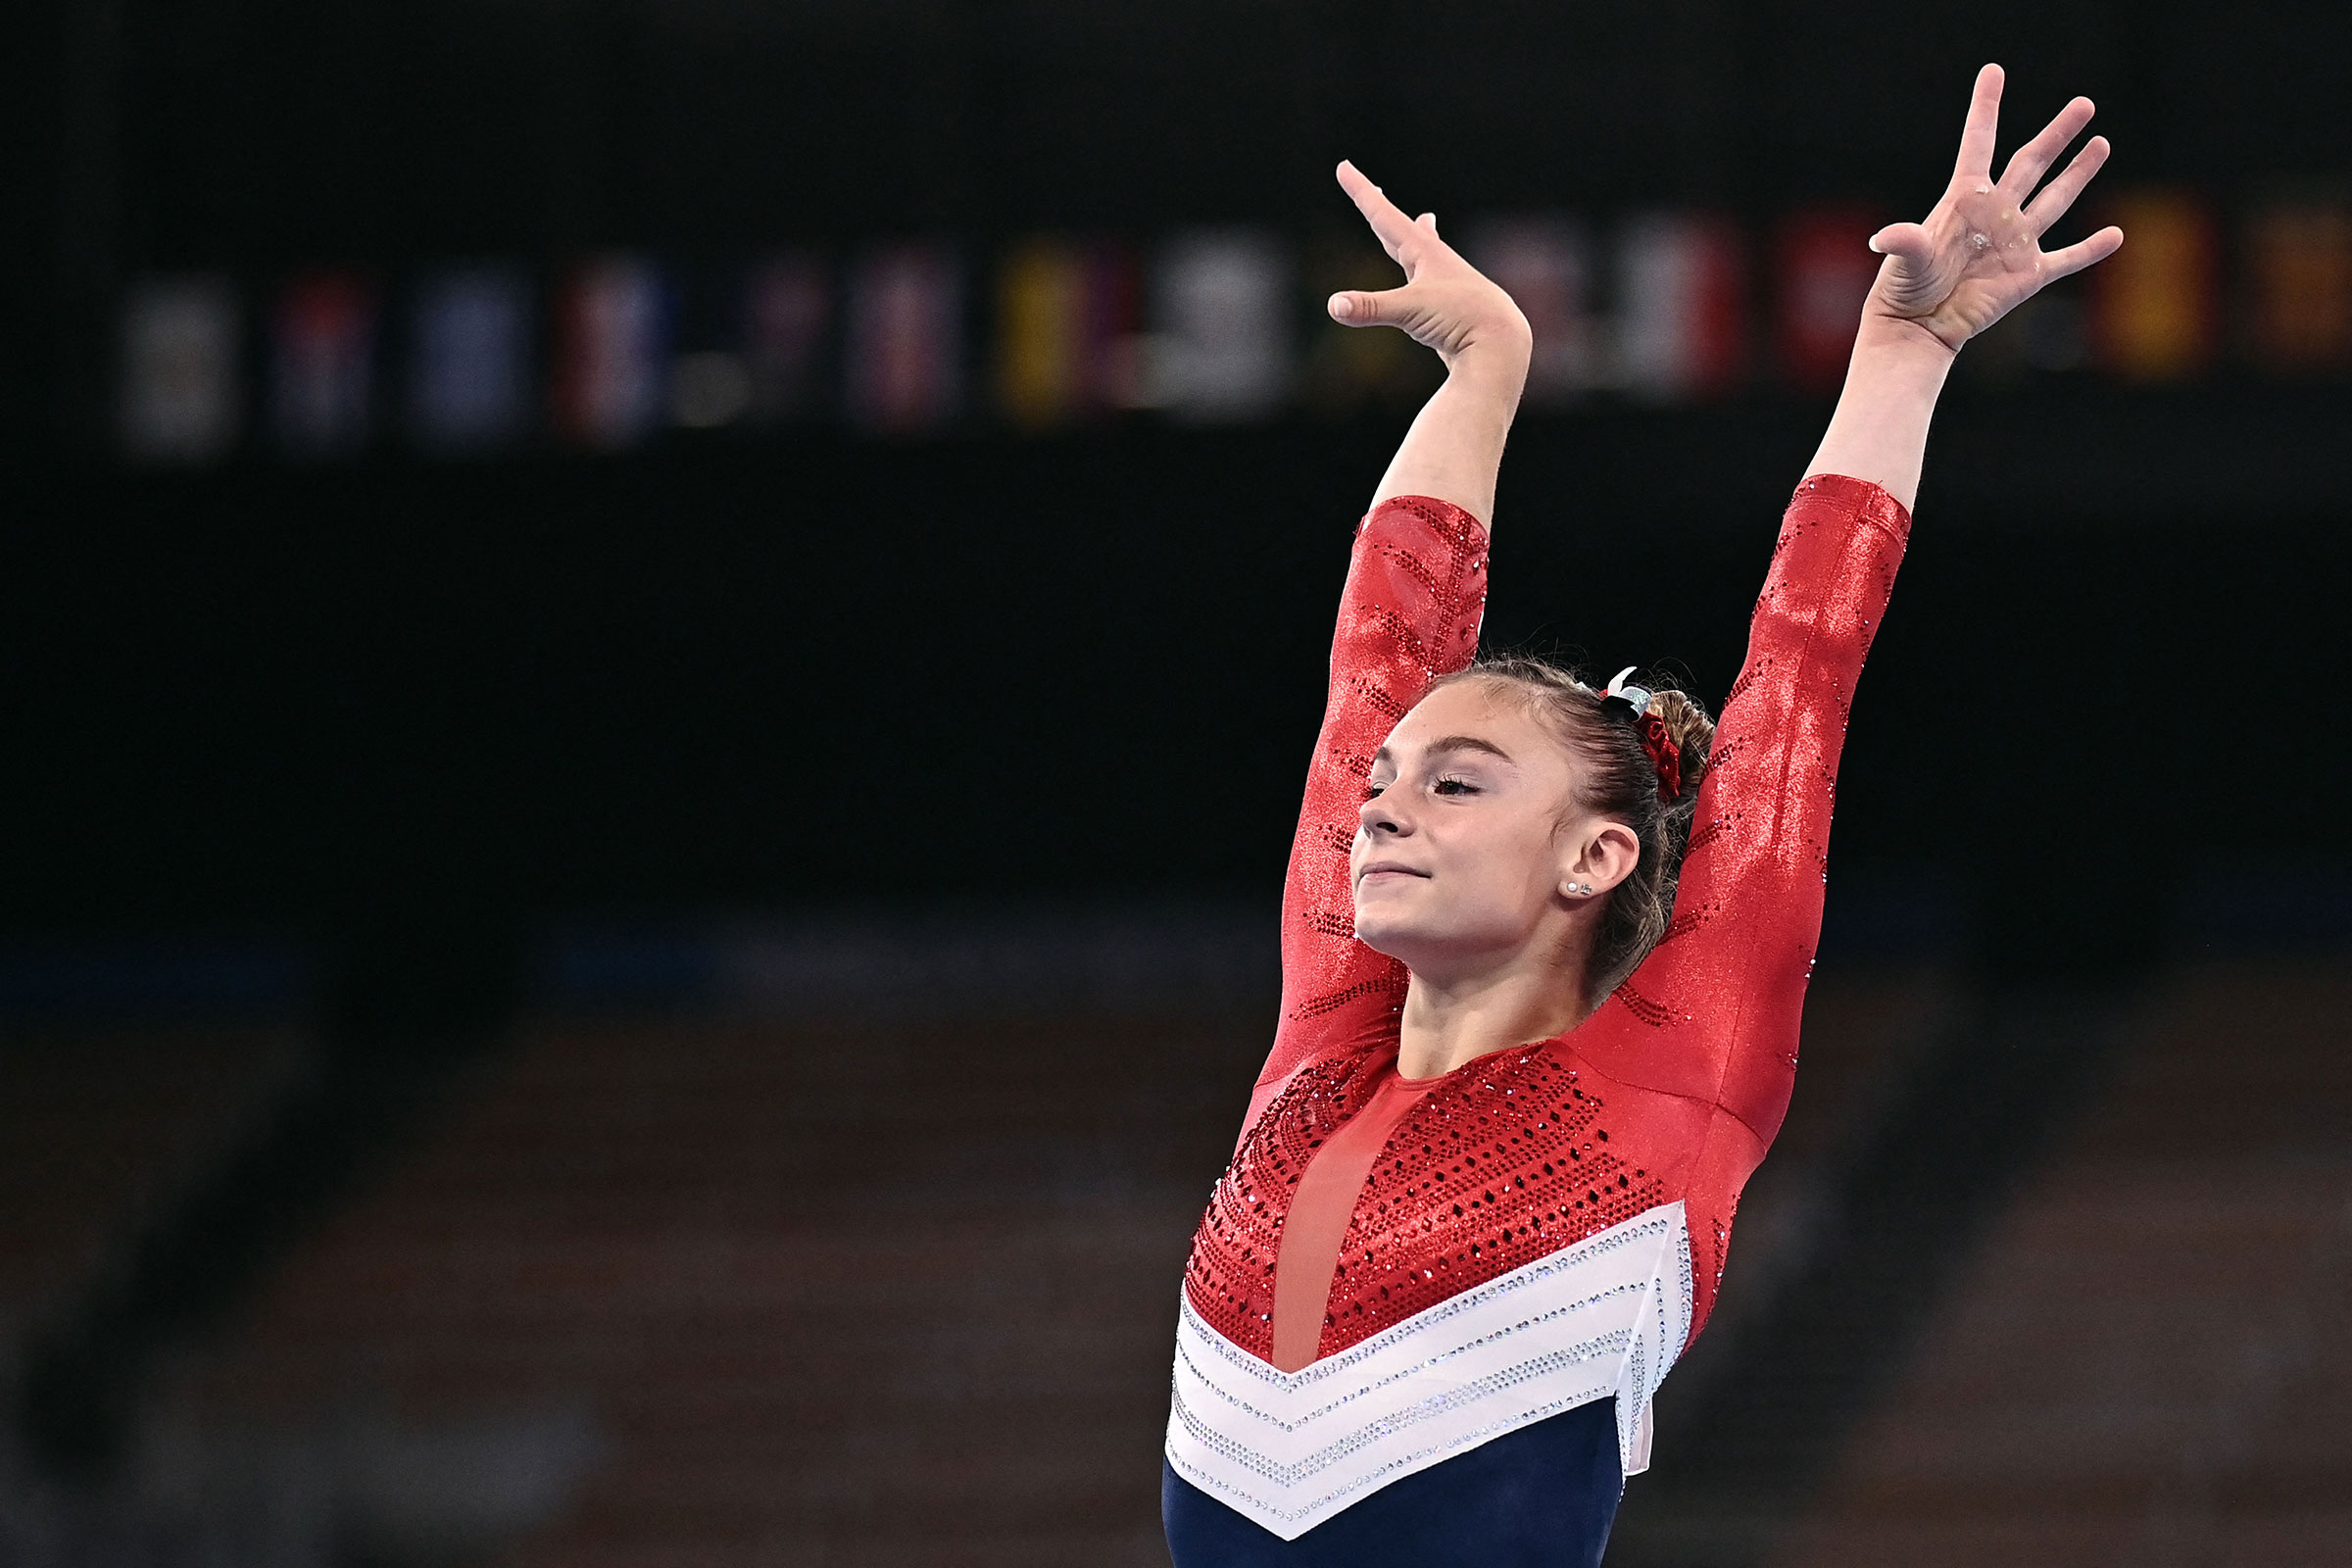 Grace McCallum competes in the balance beam event of the artistic gymnastics women's team final on July 27. (Lionel Bonaventure—AFP/Getty Images)